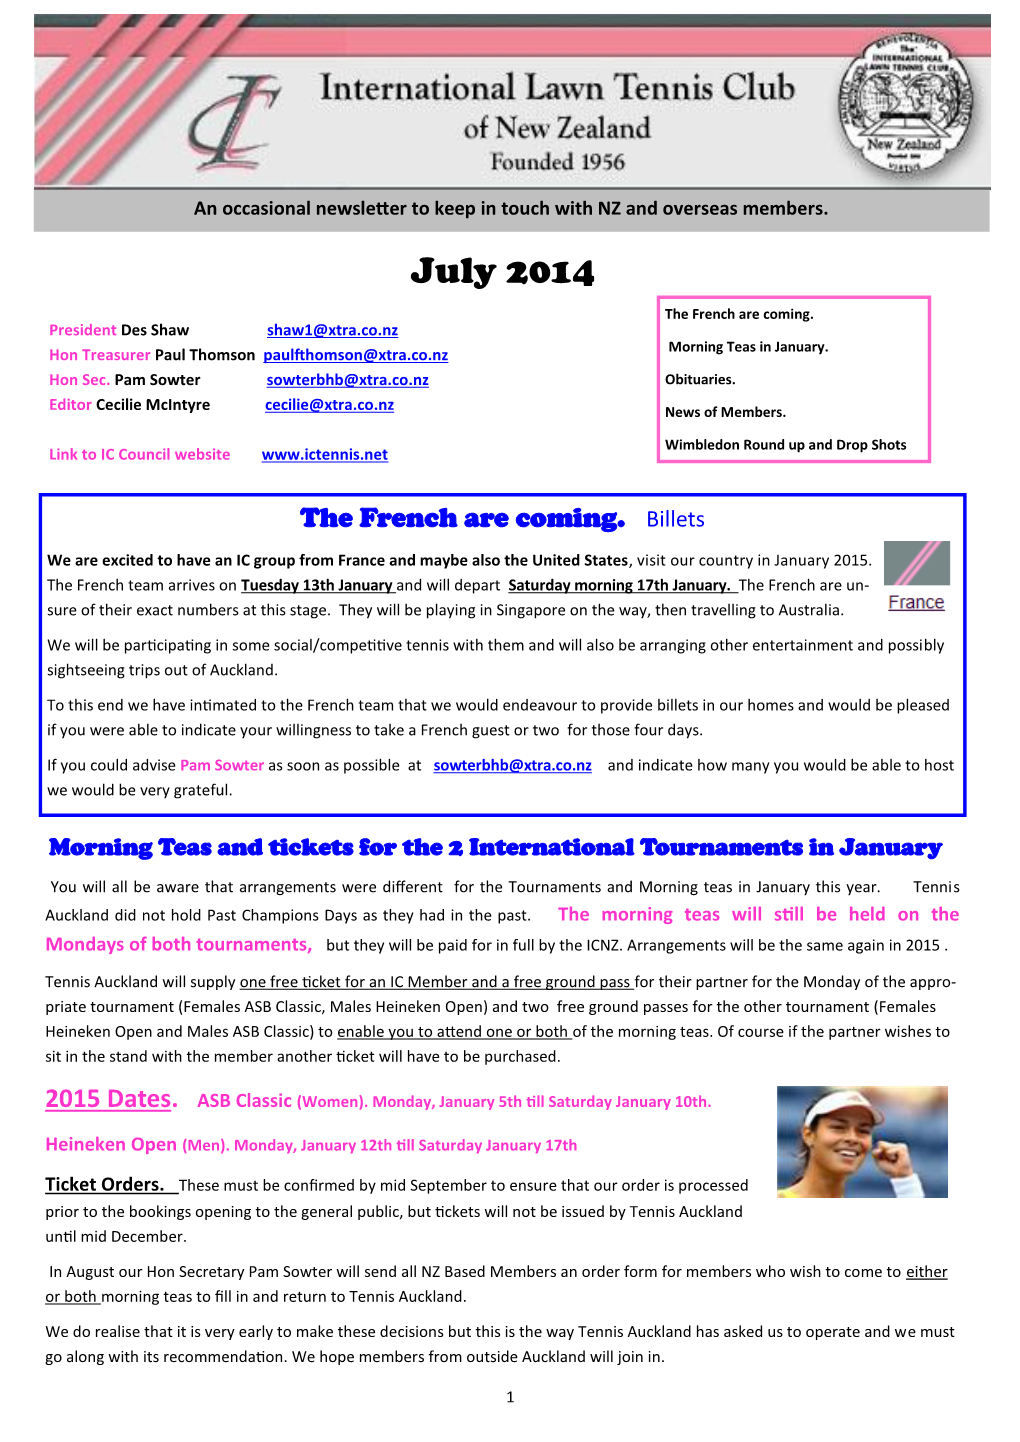 To View the Newsletter